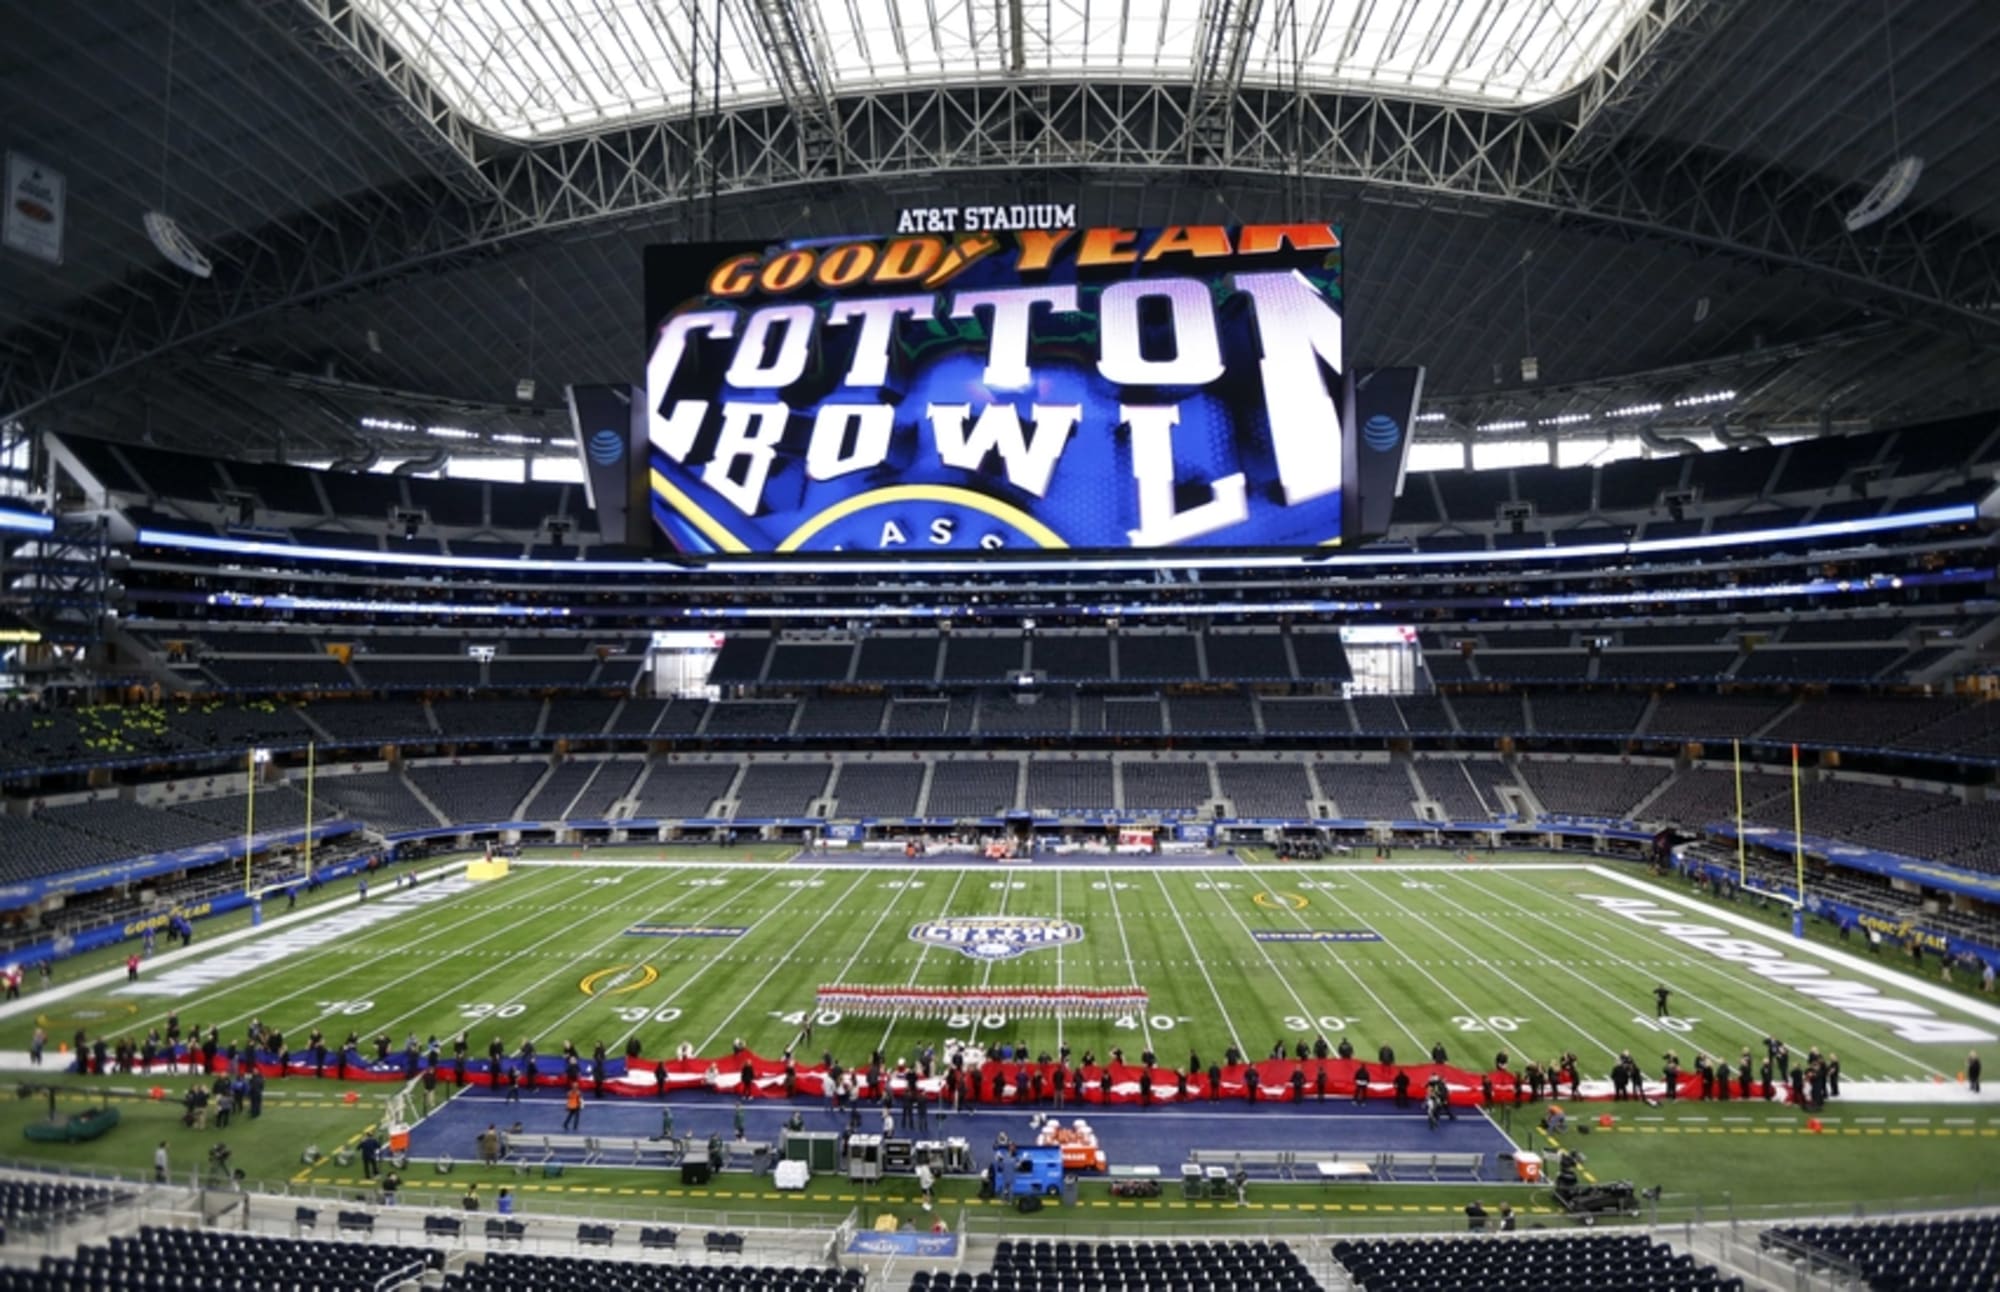 Cotton Bowl Classic Road that Led Wisconsin, Western Michigan to Dallas